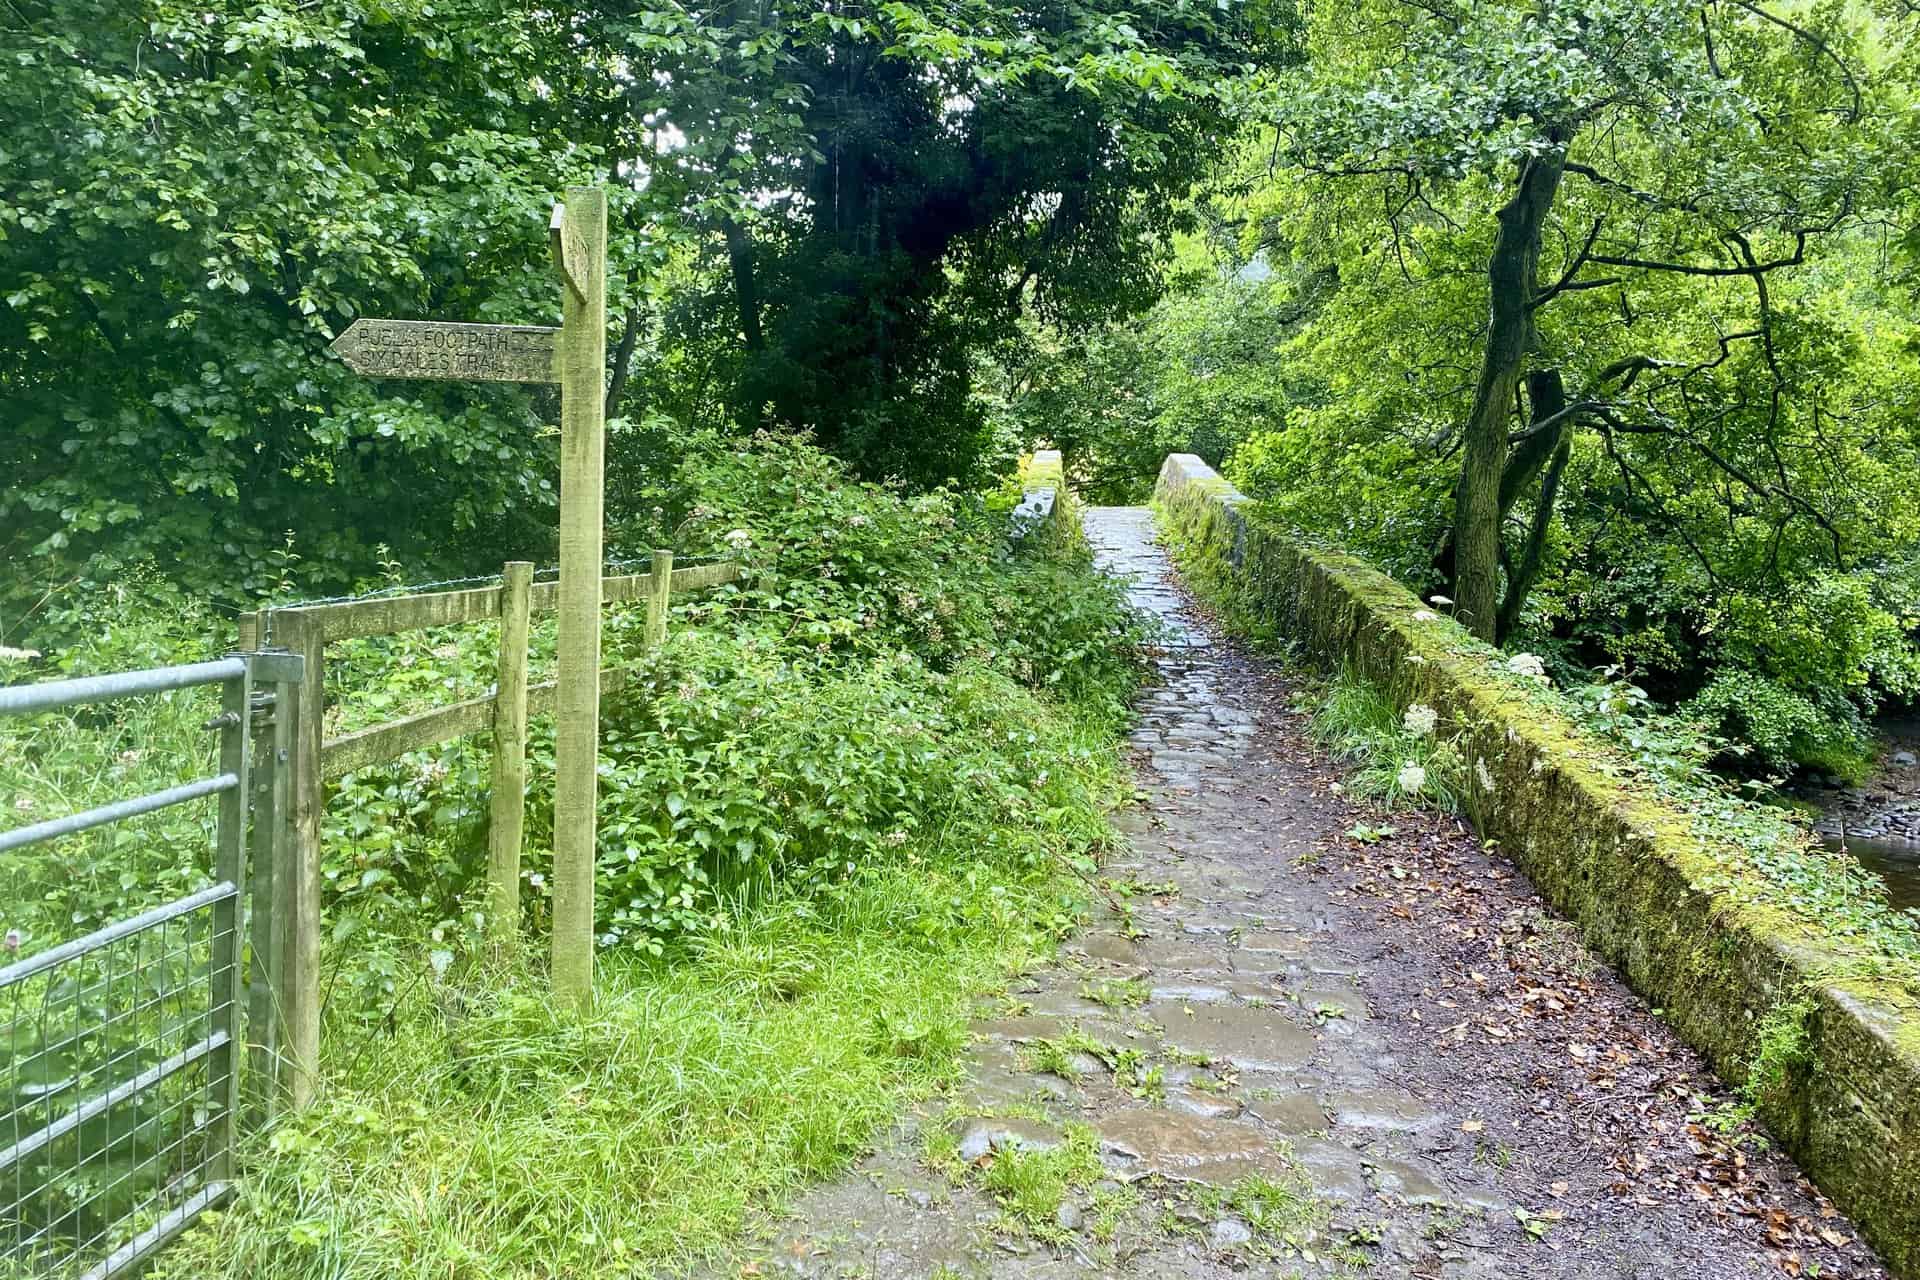 Dobpark Bridge over the River Washburn, with an accompanying signpost for the Six Dales Trail leading back to Swinsty Reservoir.